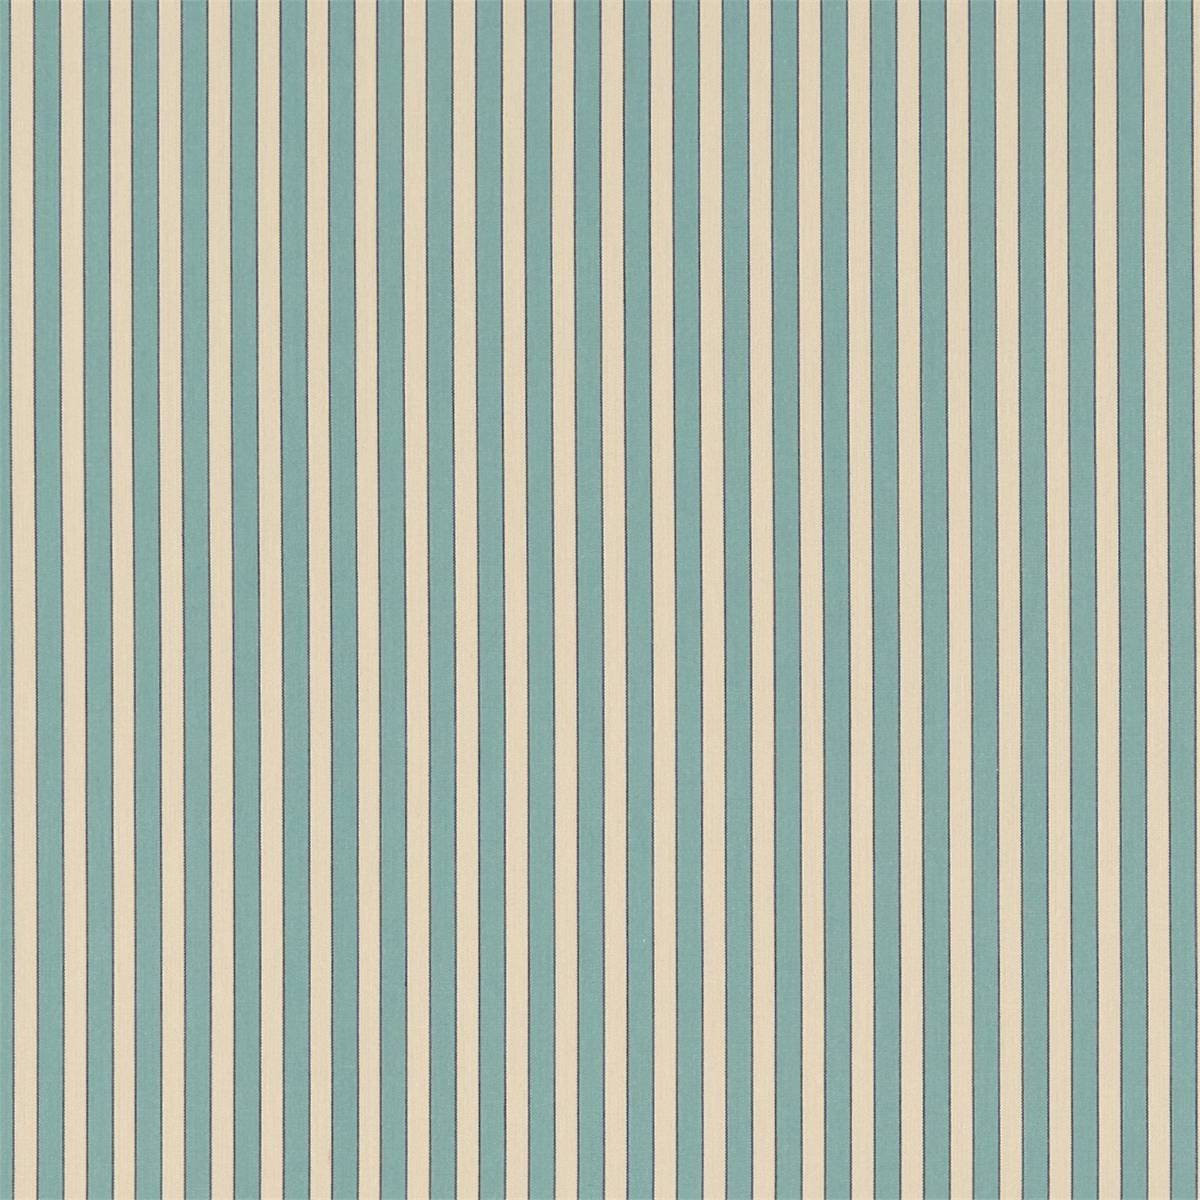 Sutton Teal/Linen Fabric by Sanderson